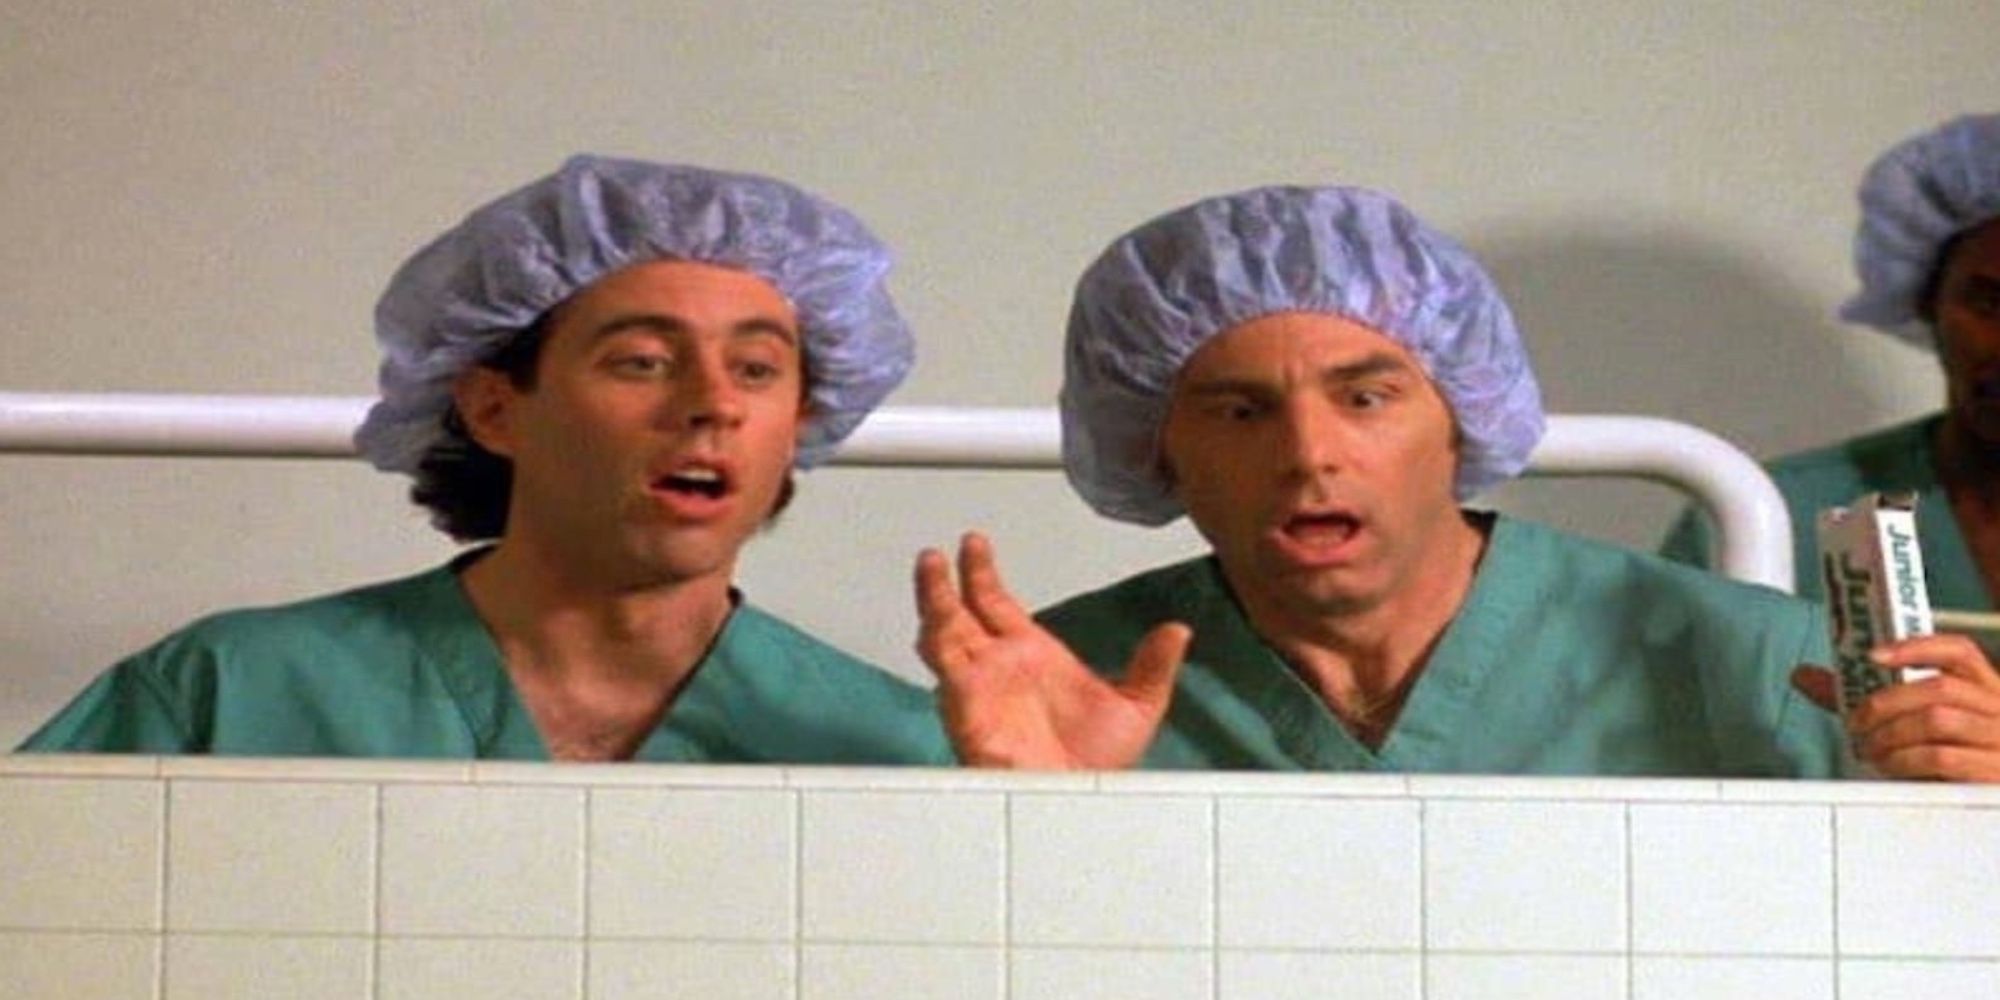 Kramer, played by Michael Richards, and Jerry, played by Jerry Seinfeld, watch a Junior Mint fall into a patient's stomach